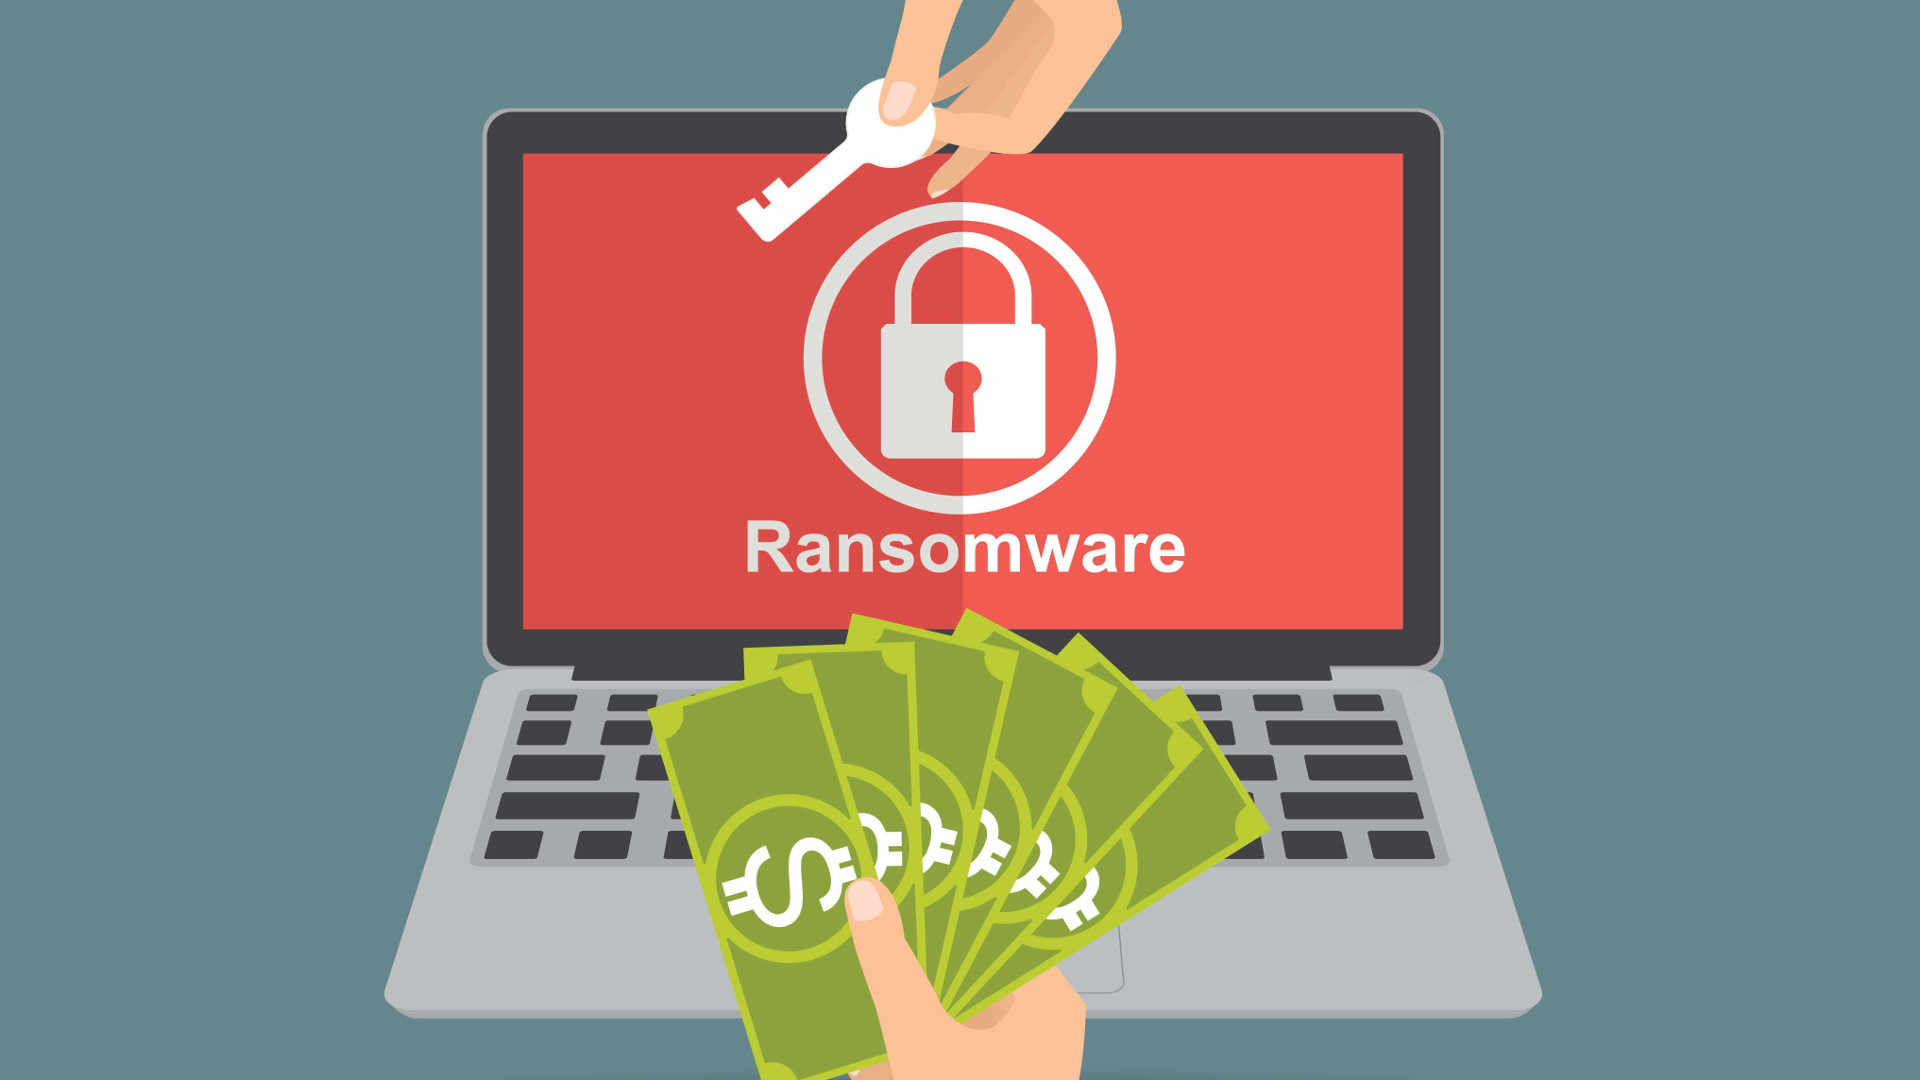 Snatch Ransomware - A New Threat Bypassing Antivirus in Safe Mode